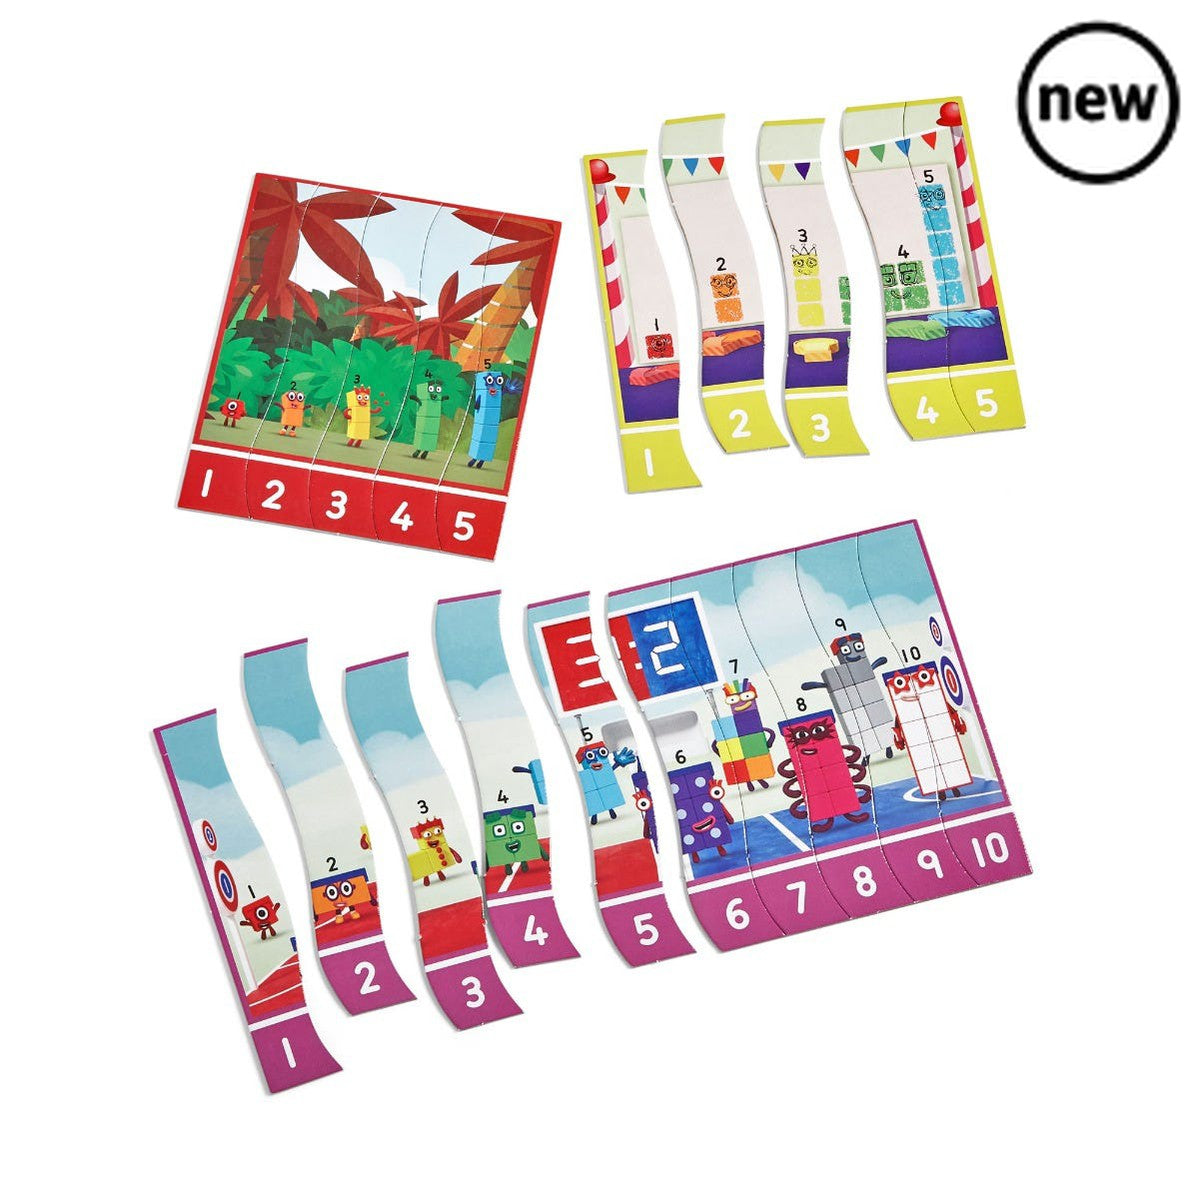 Numberblocks Sequencing Puzzle Set, Count on the Numberblocks One to Twenty to help little ones learn how to sequence numbers in the right order. There are 10 double-sided Numberblocks jigsaw puzzles featuring the friendly Numberblocks One to Twenty. There are 4 each for 1–5 and 1–10, and 2 for numbers 1–20. Each Numberblocks puzzle is colour-coded, and features a number line, which helps children compare numbers as they order them in the correct sequence. Perfect for learning through puzzle play at home or